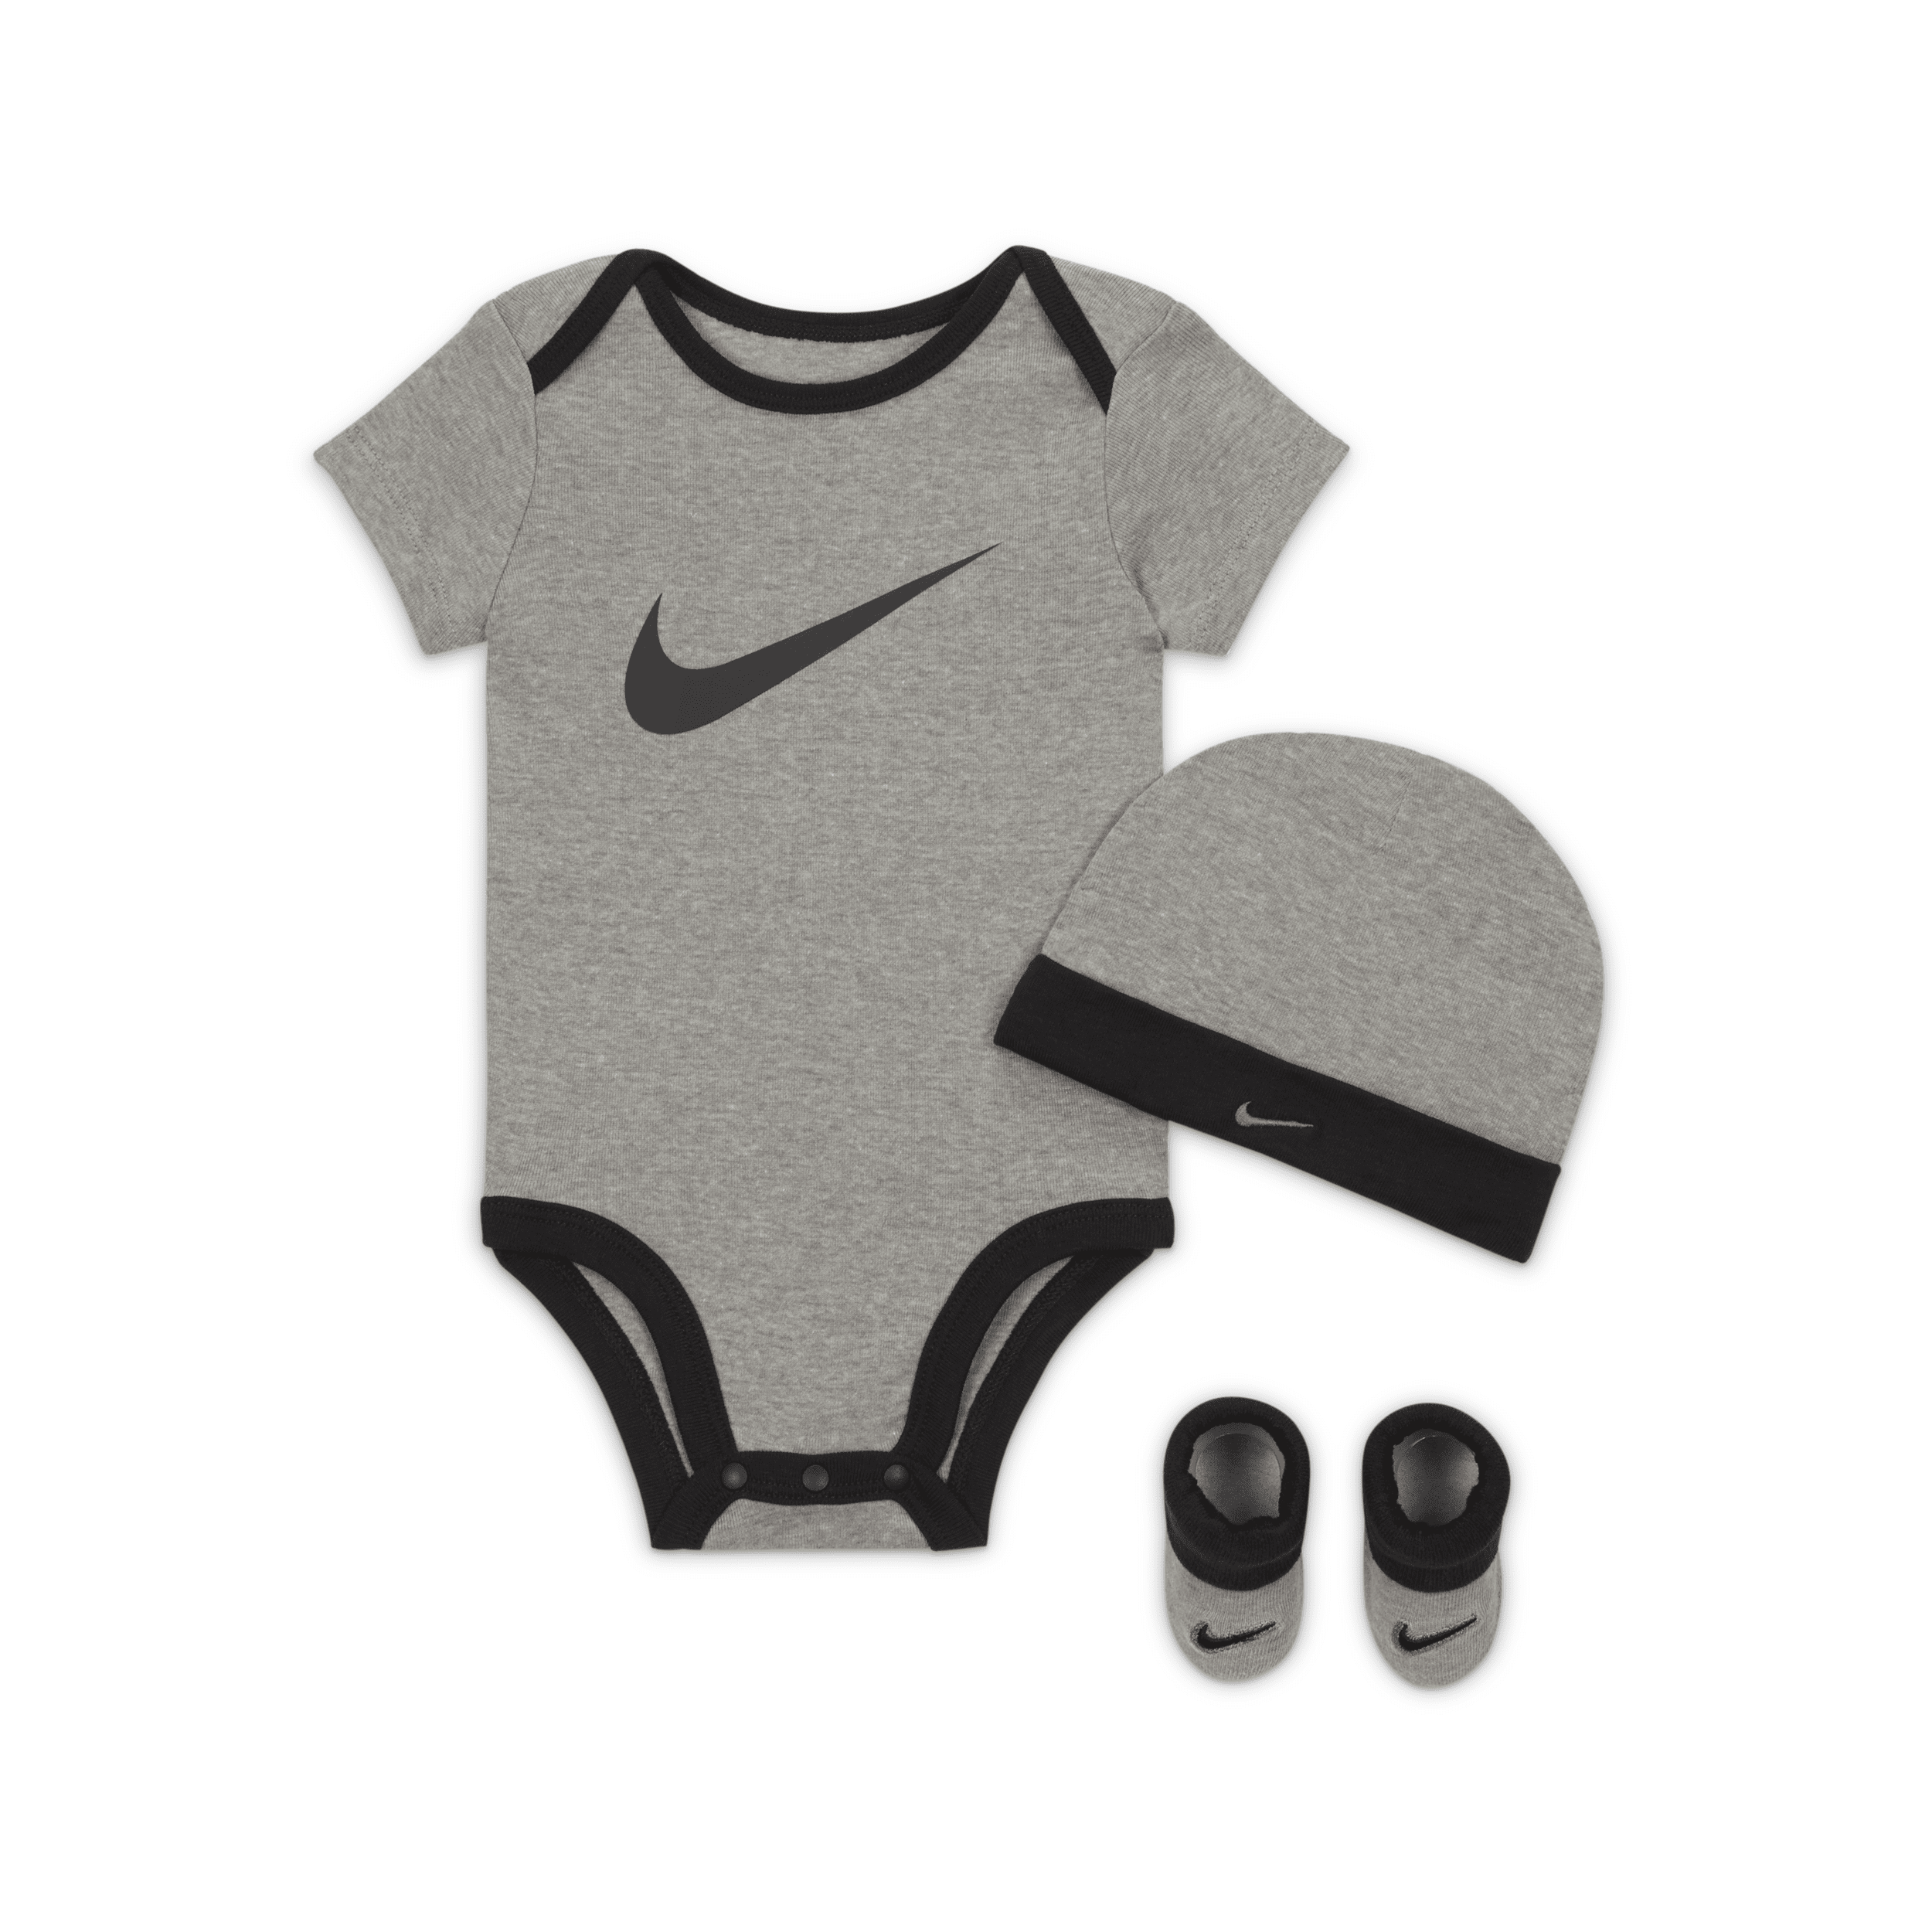 Nike Baby (6-12m) Bodysuit, Hat And Booties Box Set In Grey